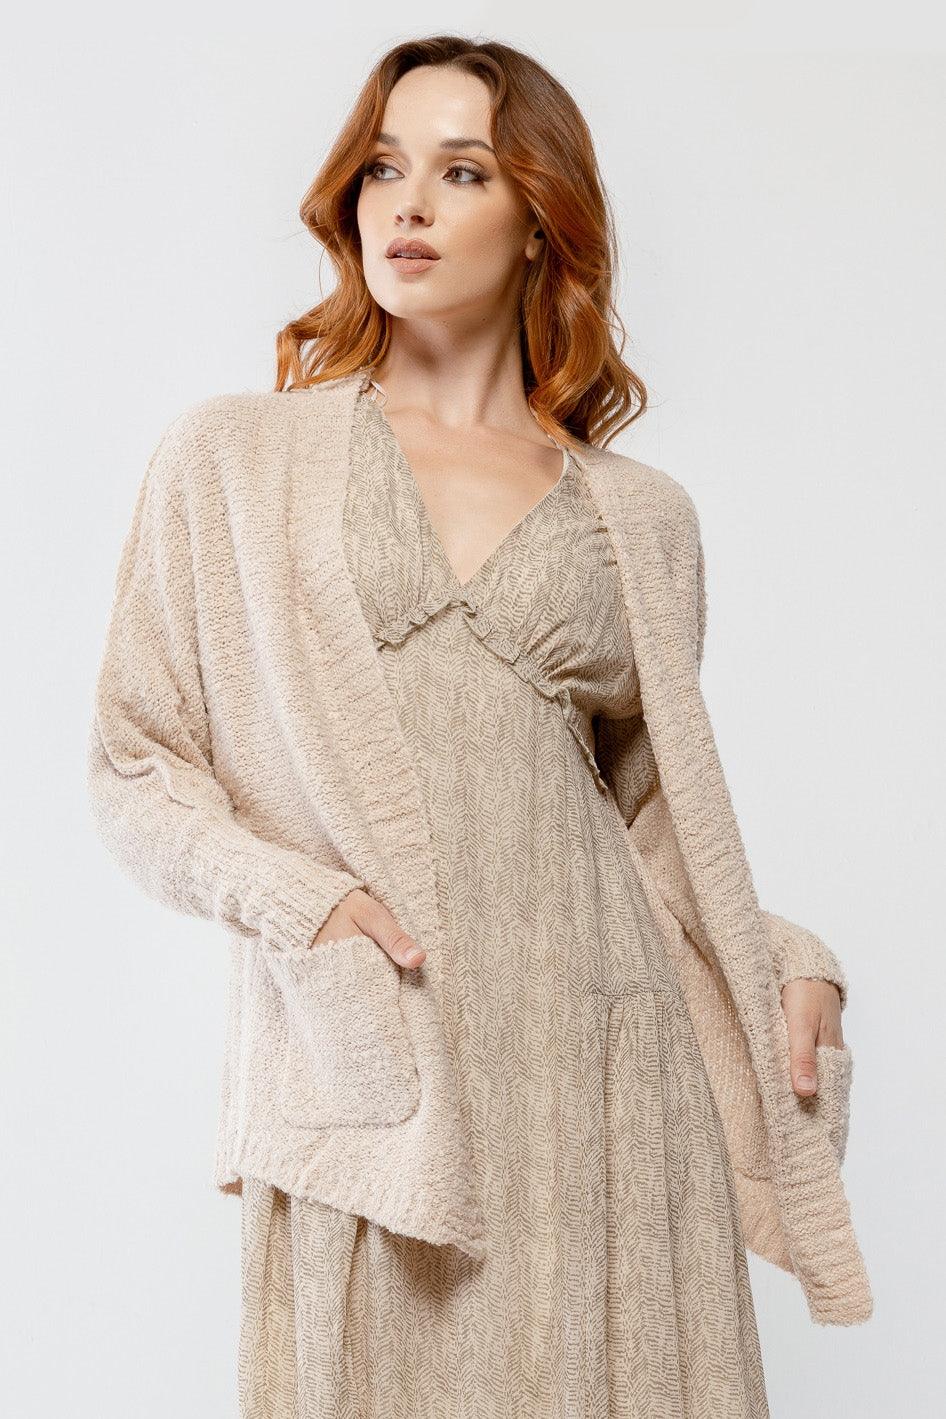 Cream Knit Textured Two Pocket Open Front Cardigan /3-2